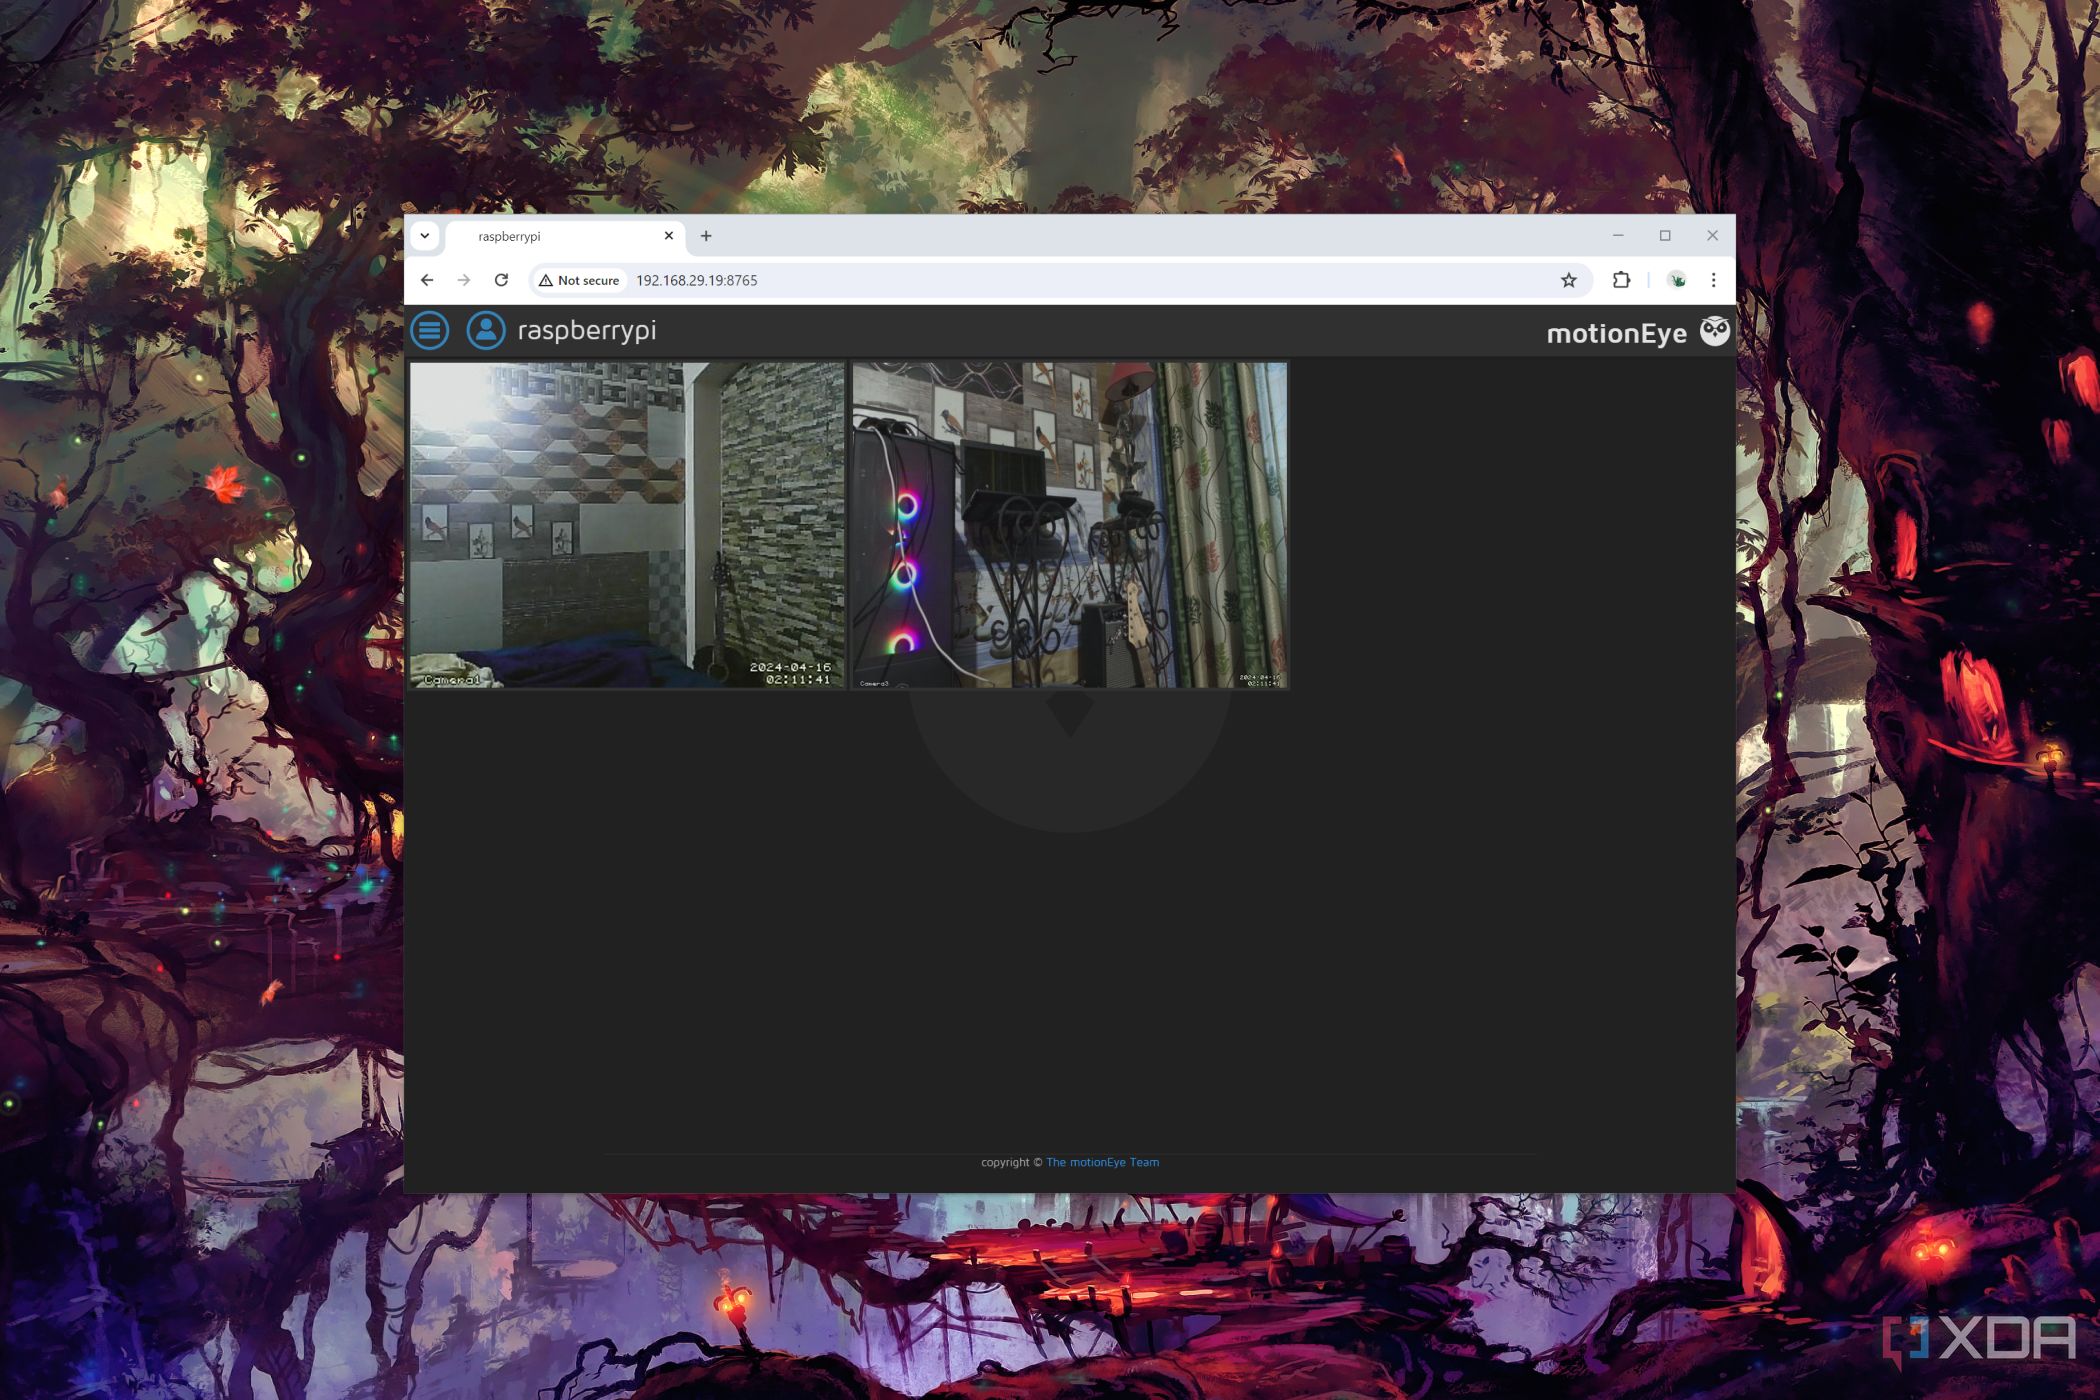 The MotionEye web interface running on a PC